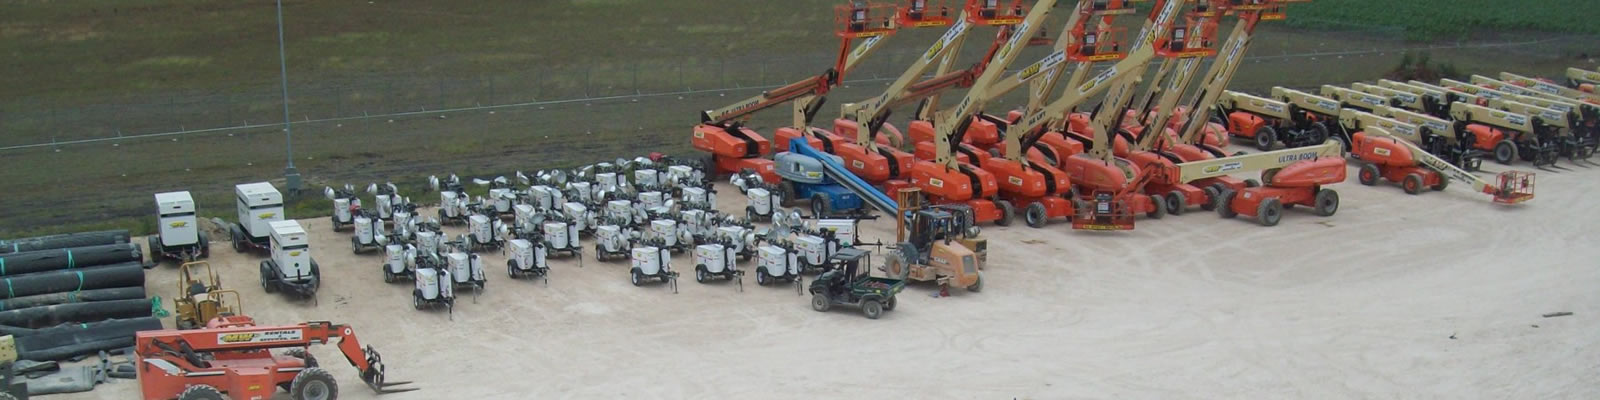 Our company specializes in equipment rentals and oil field services.